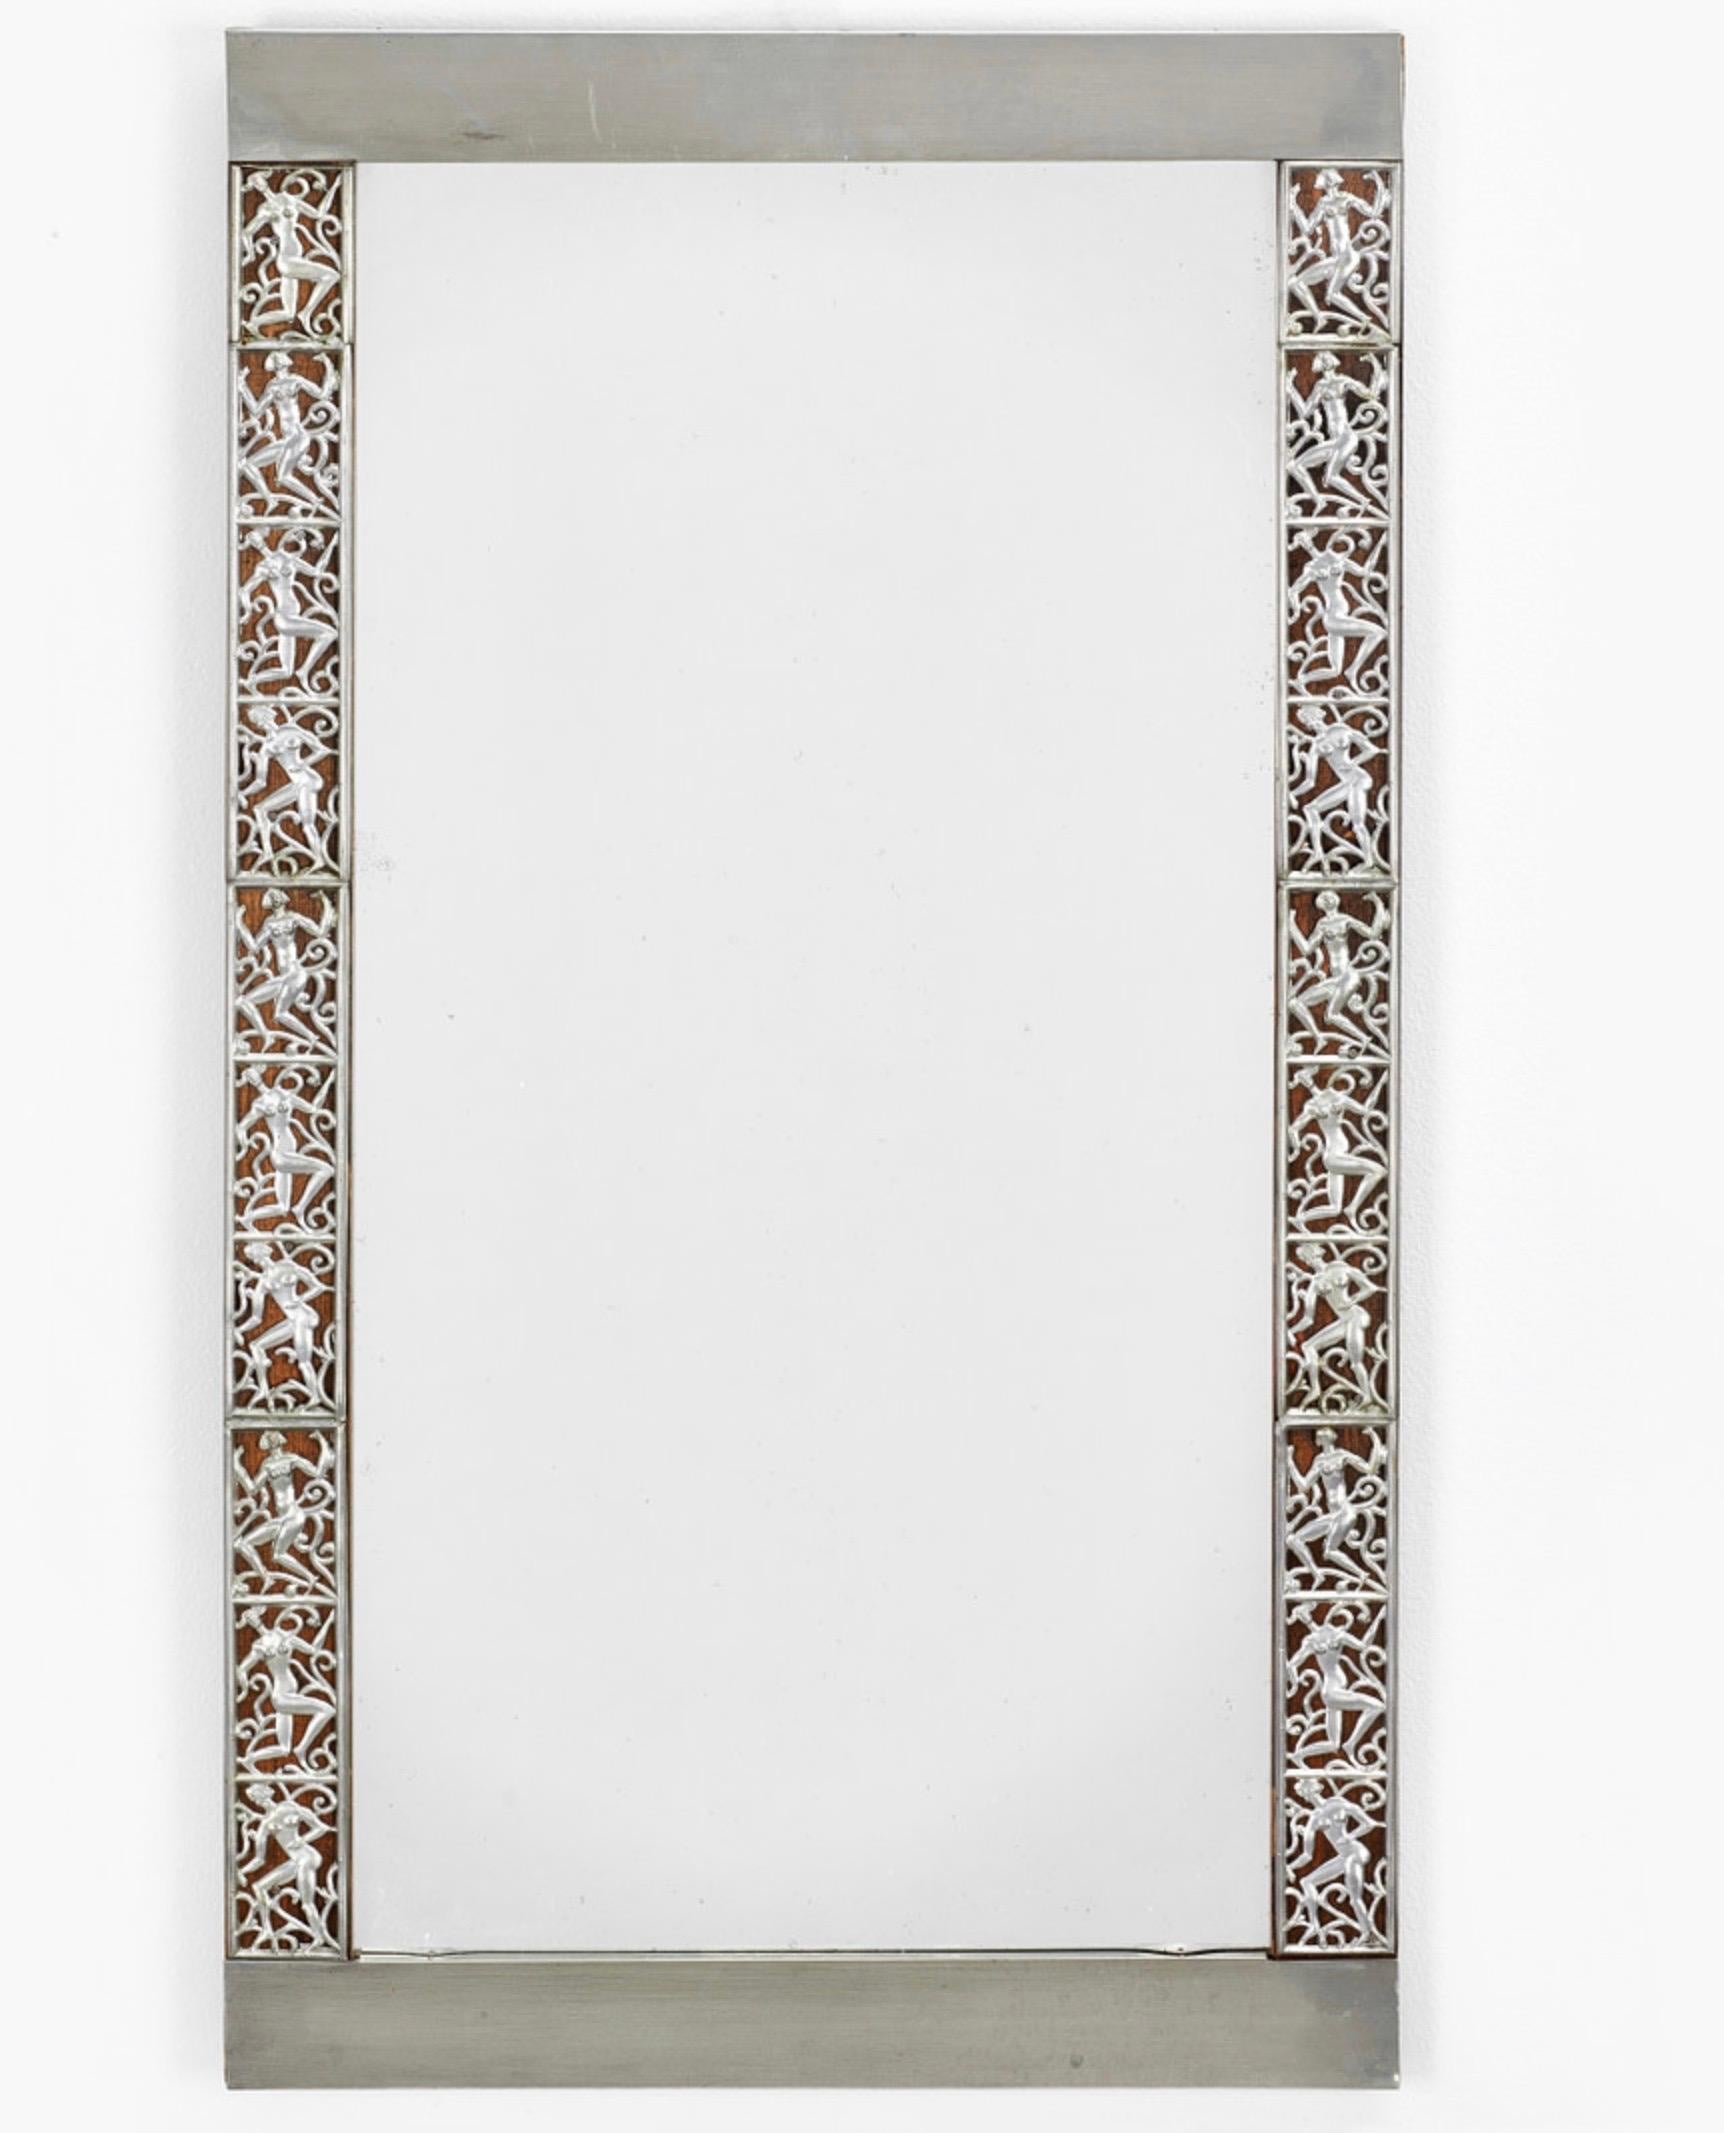 A small Swedish Grace mirror with a pewter-frame depicting dancing women in rectangular frames. Designed by David Wretling (1901-1986).